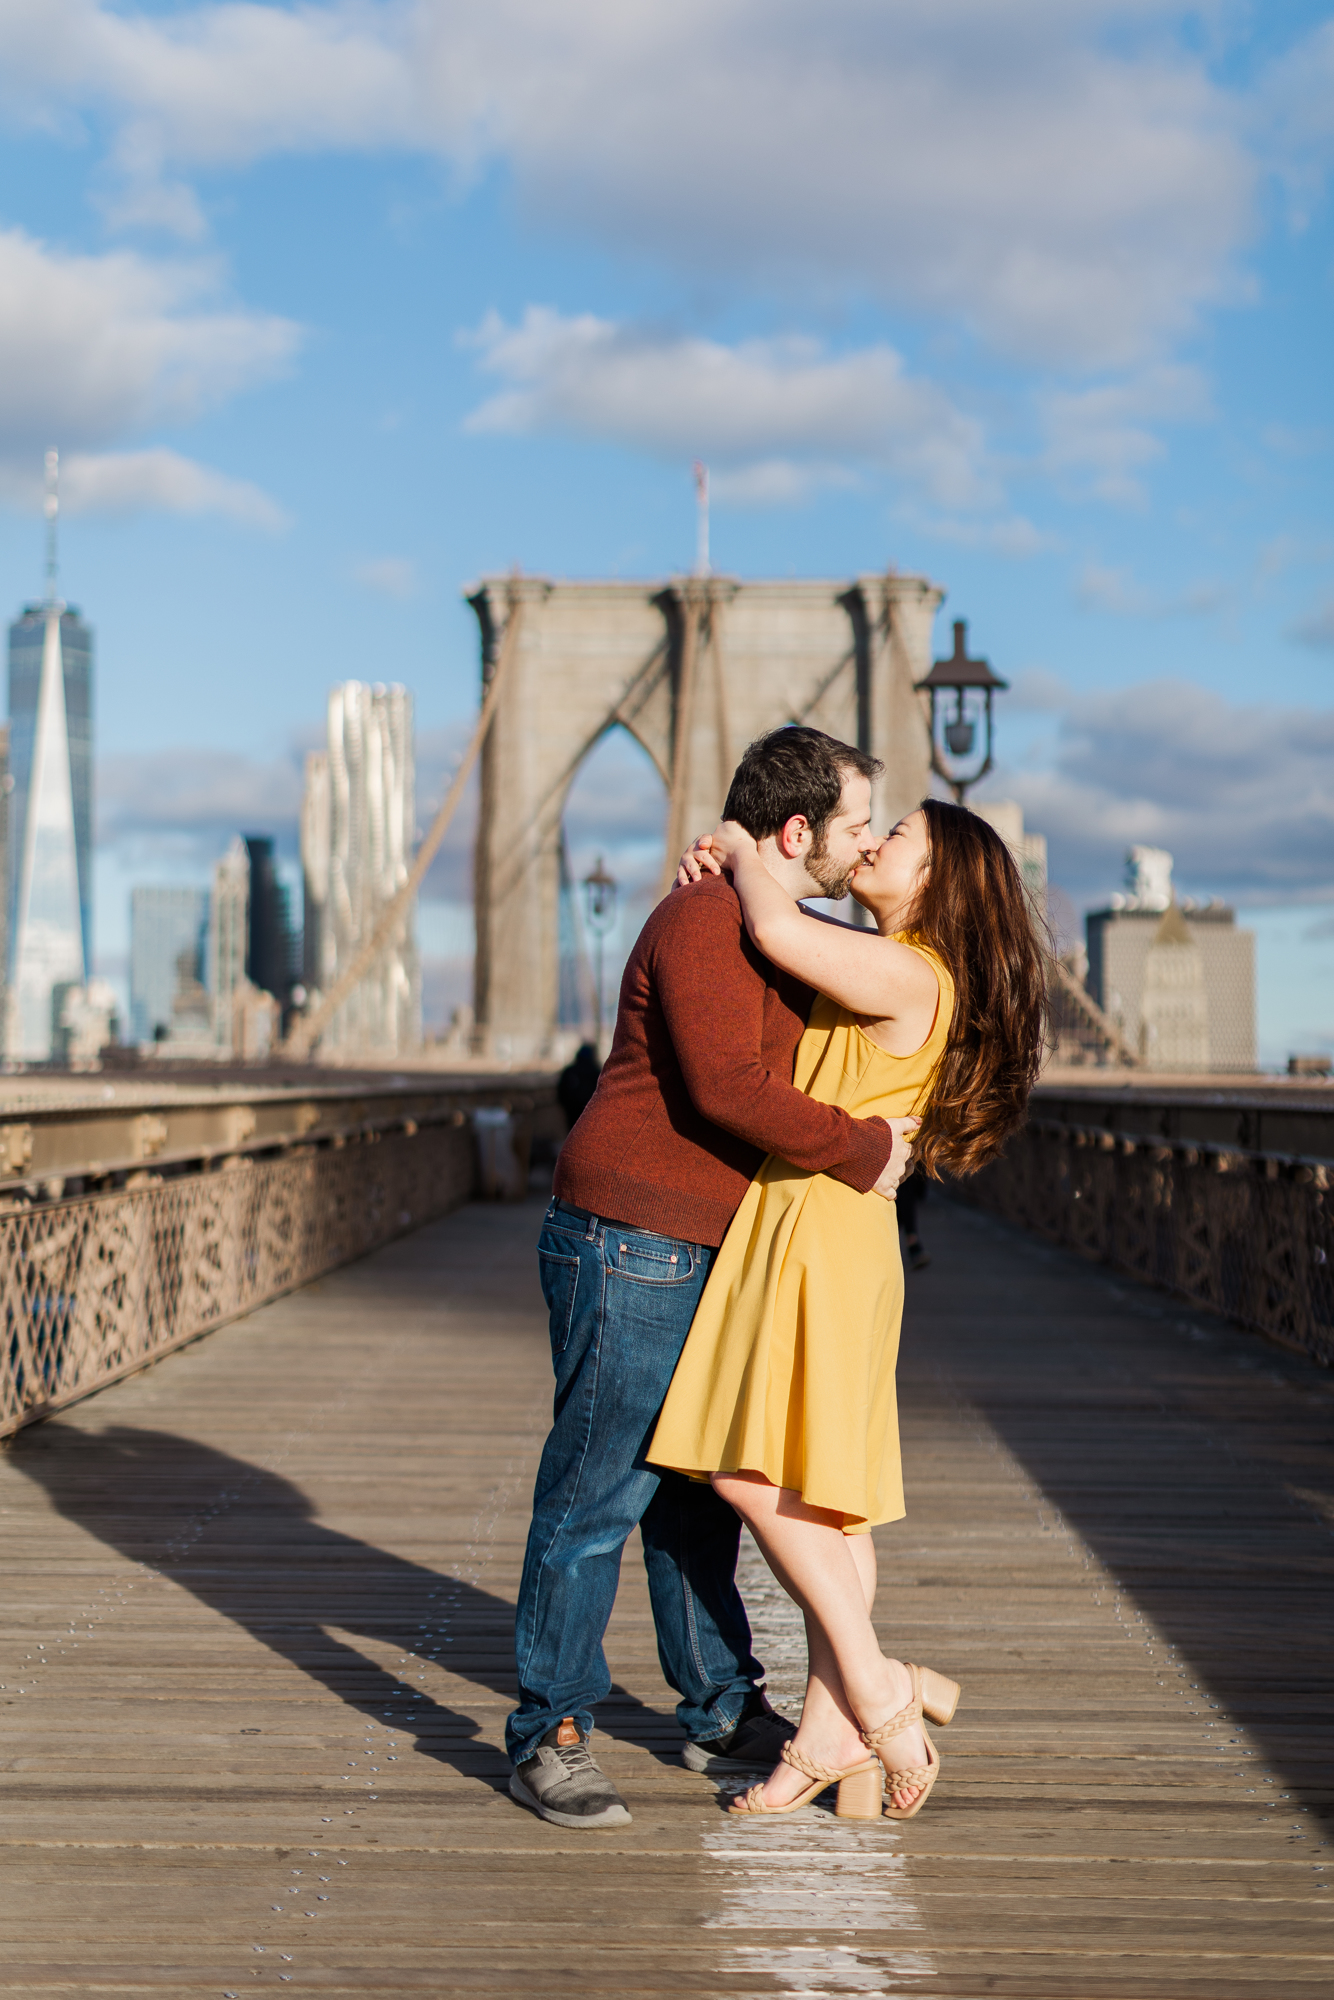 Iconic Brooklyn Bridge Engagement Photography with Matching Outfits